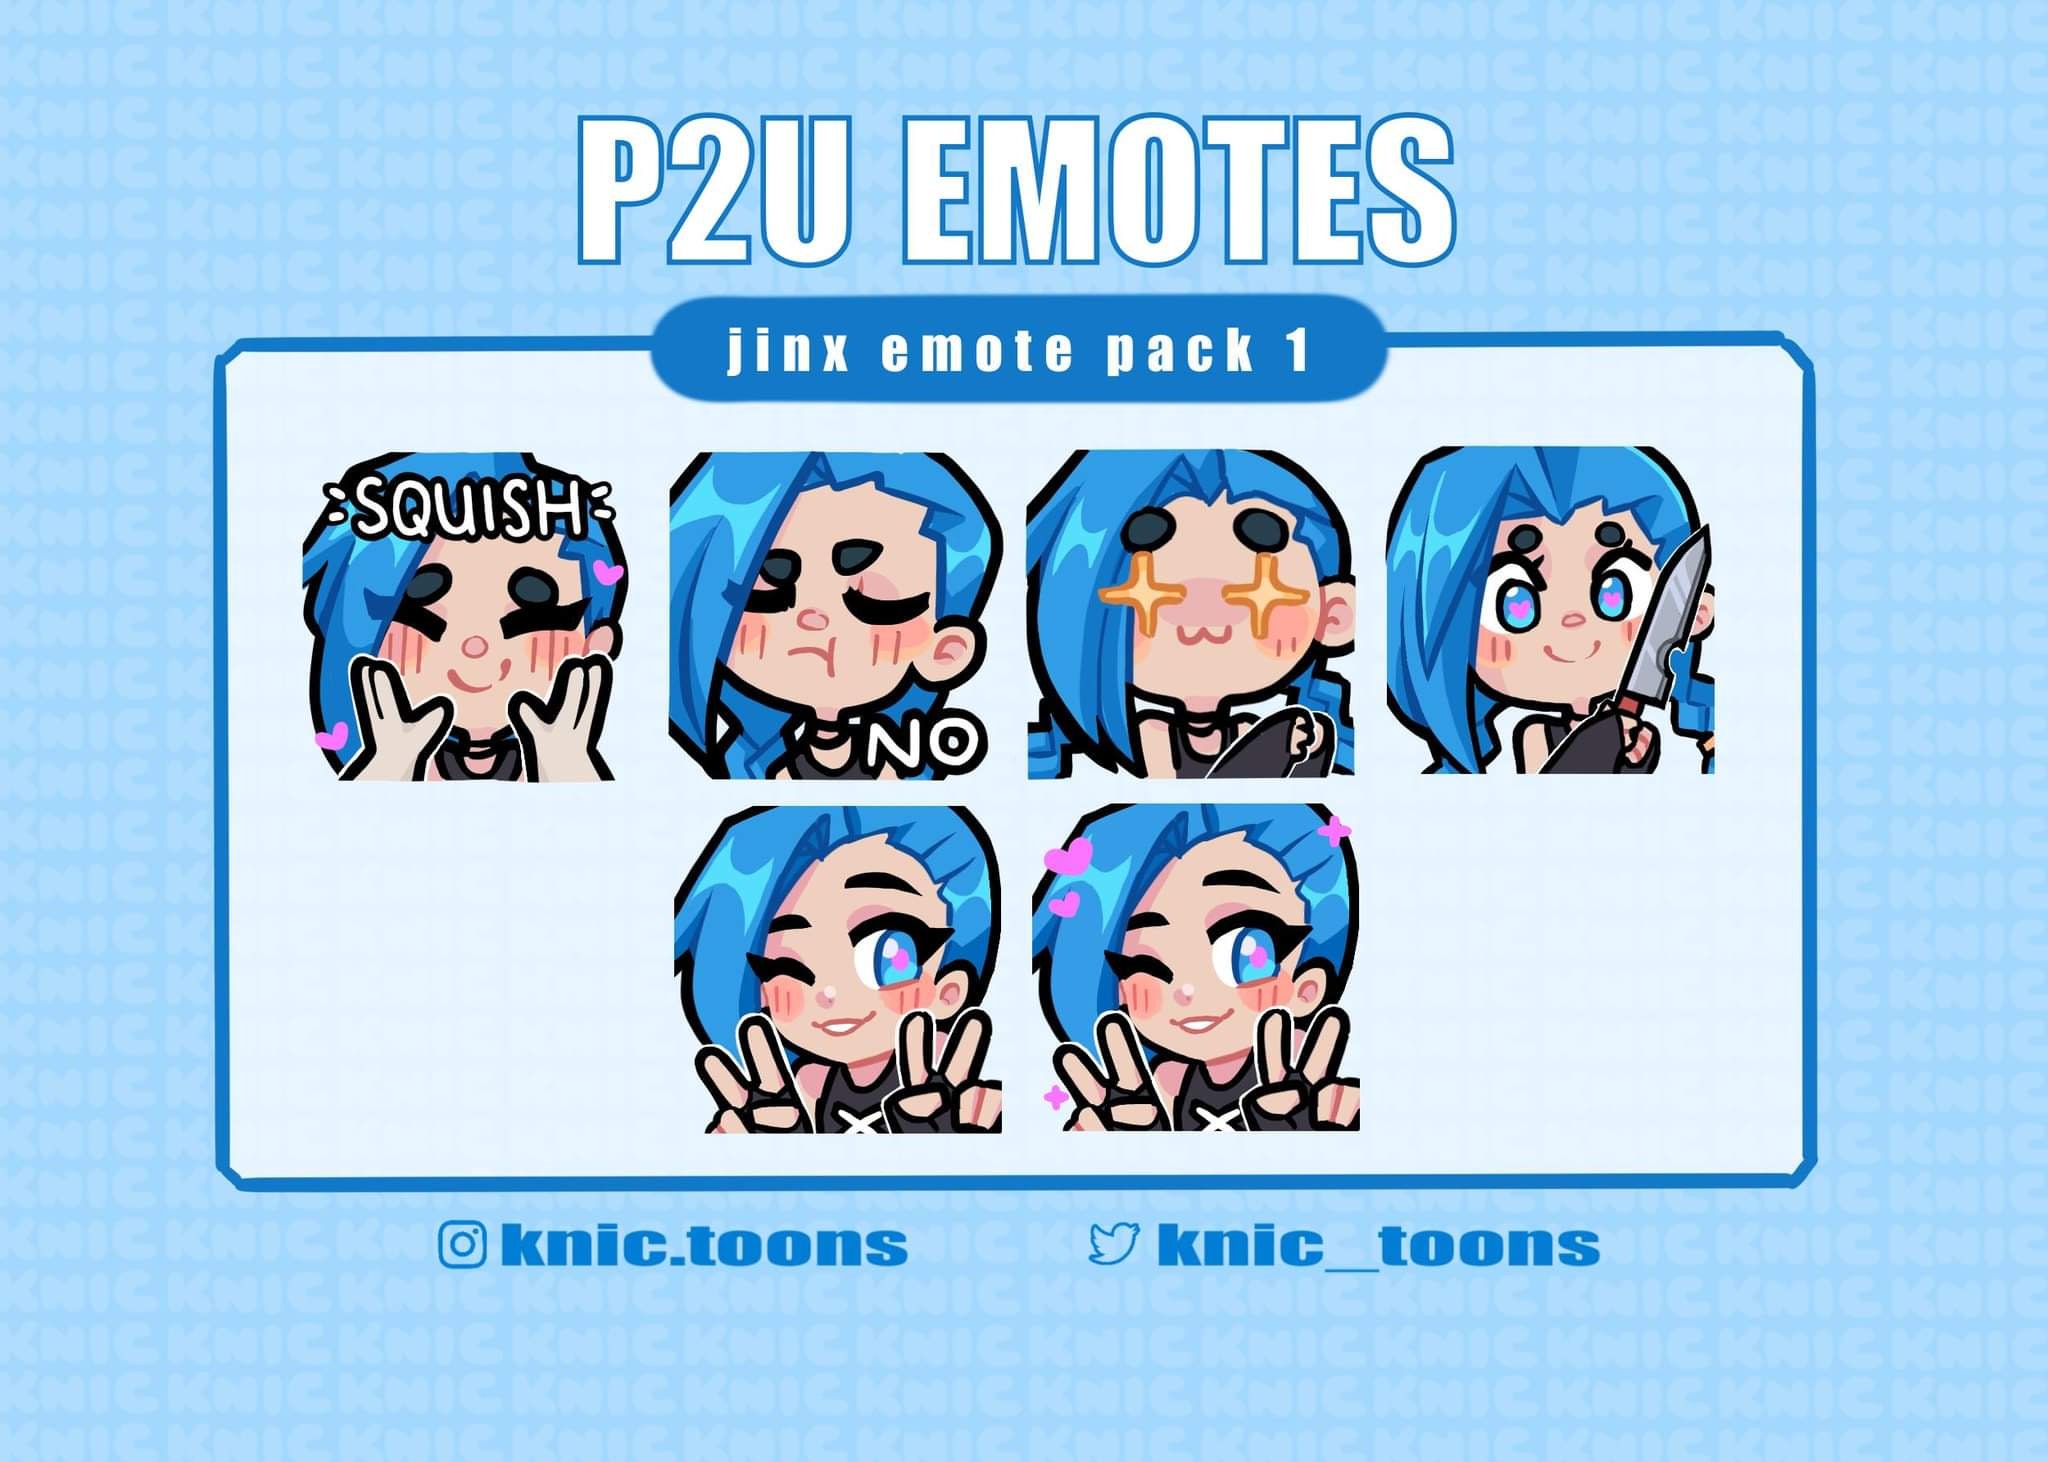 Step On Me Jinx (´▽`ʃƪ)♡ — Have some quickly made discord icons